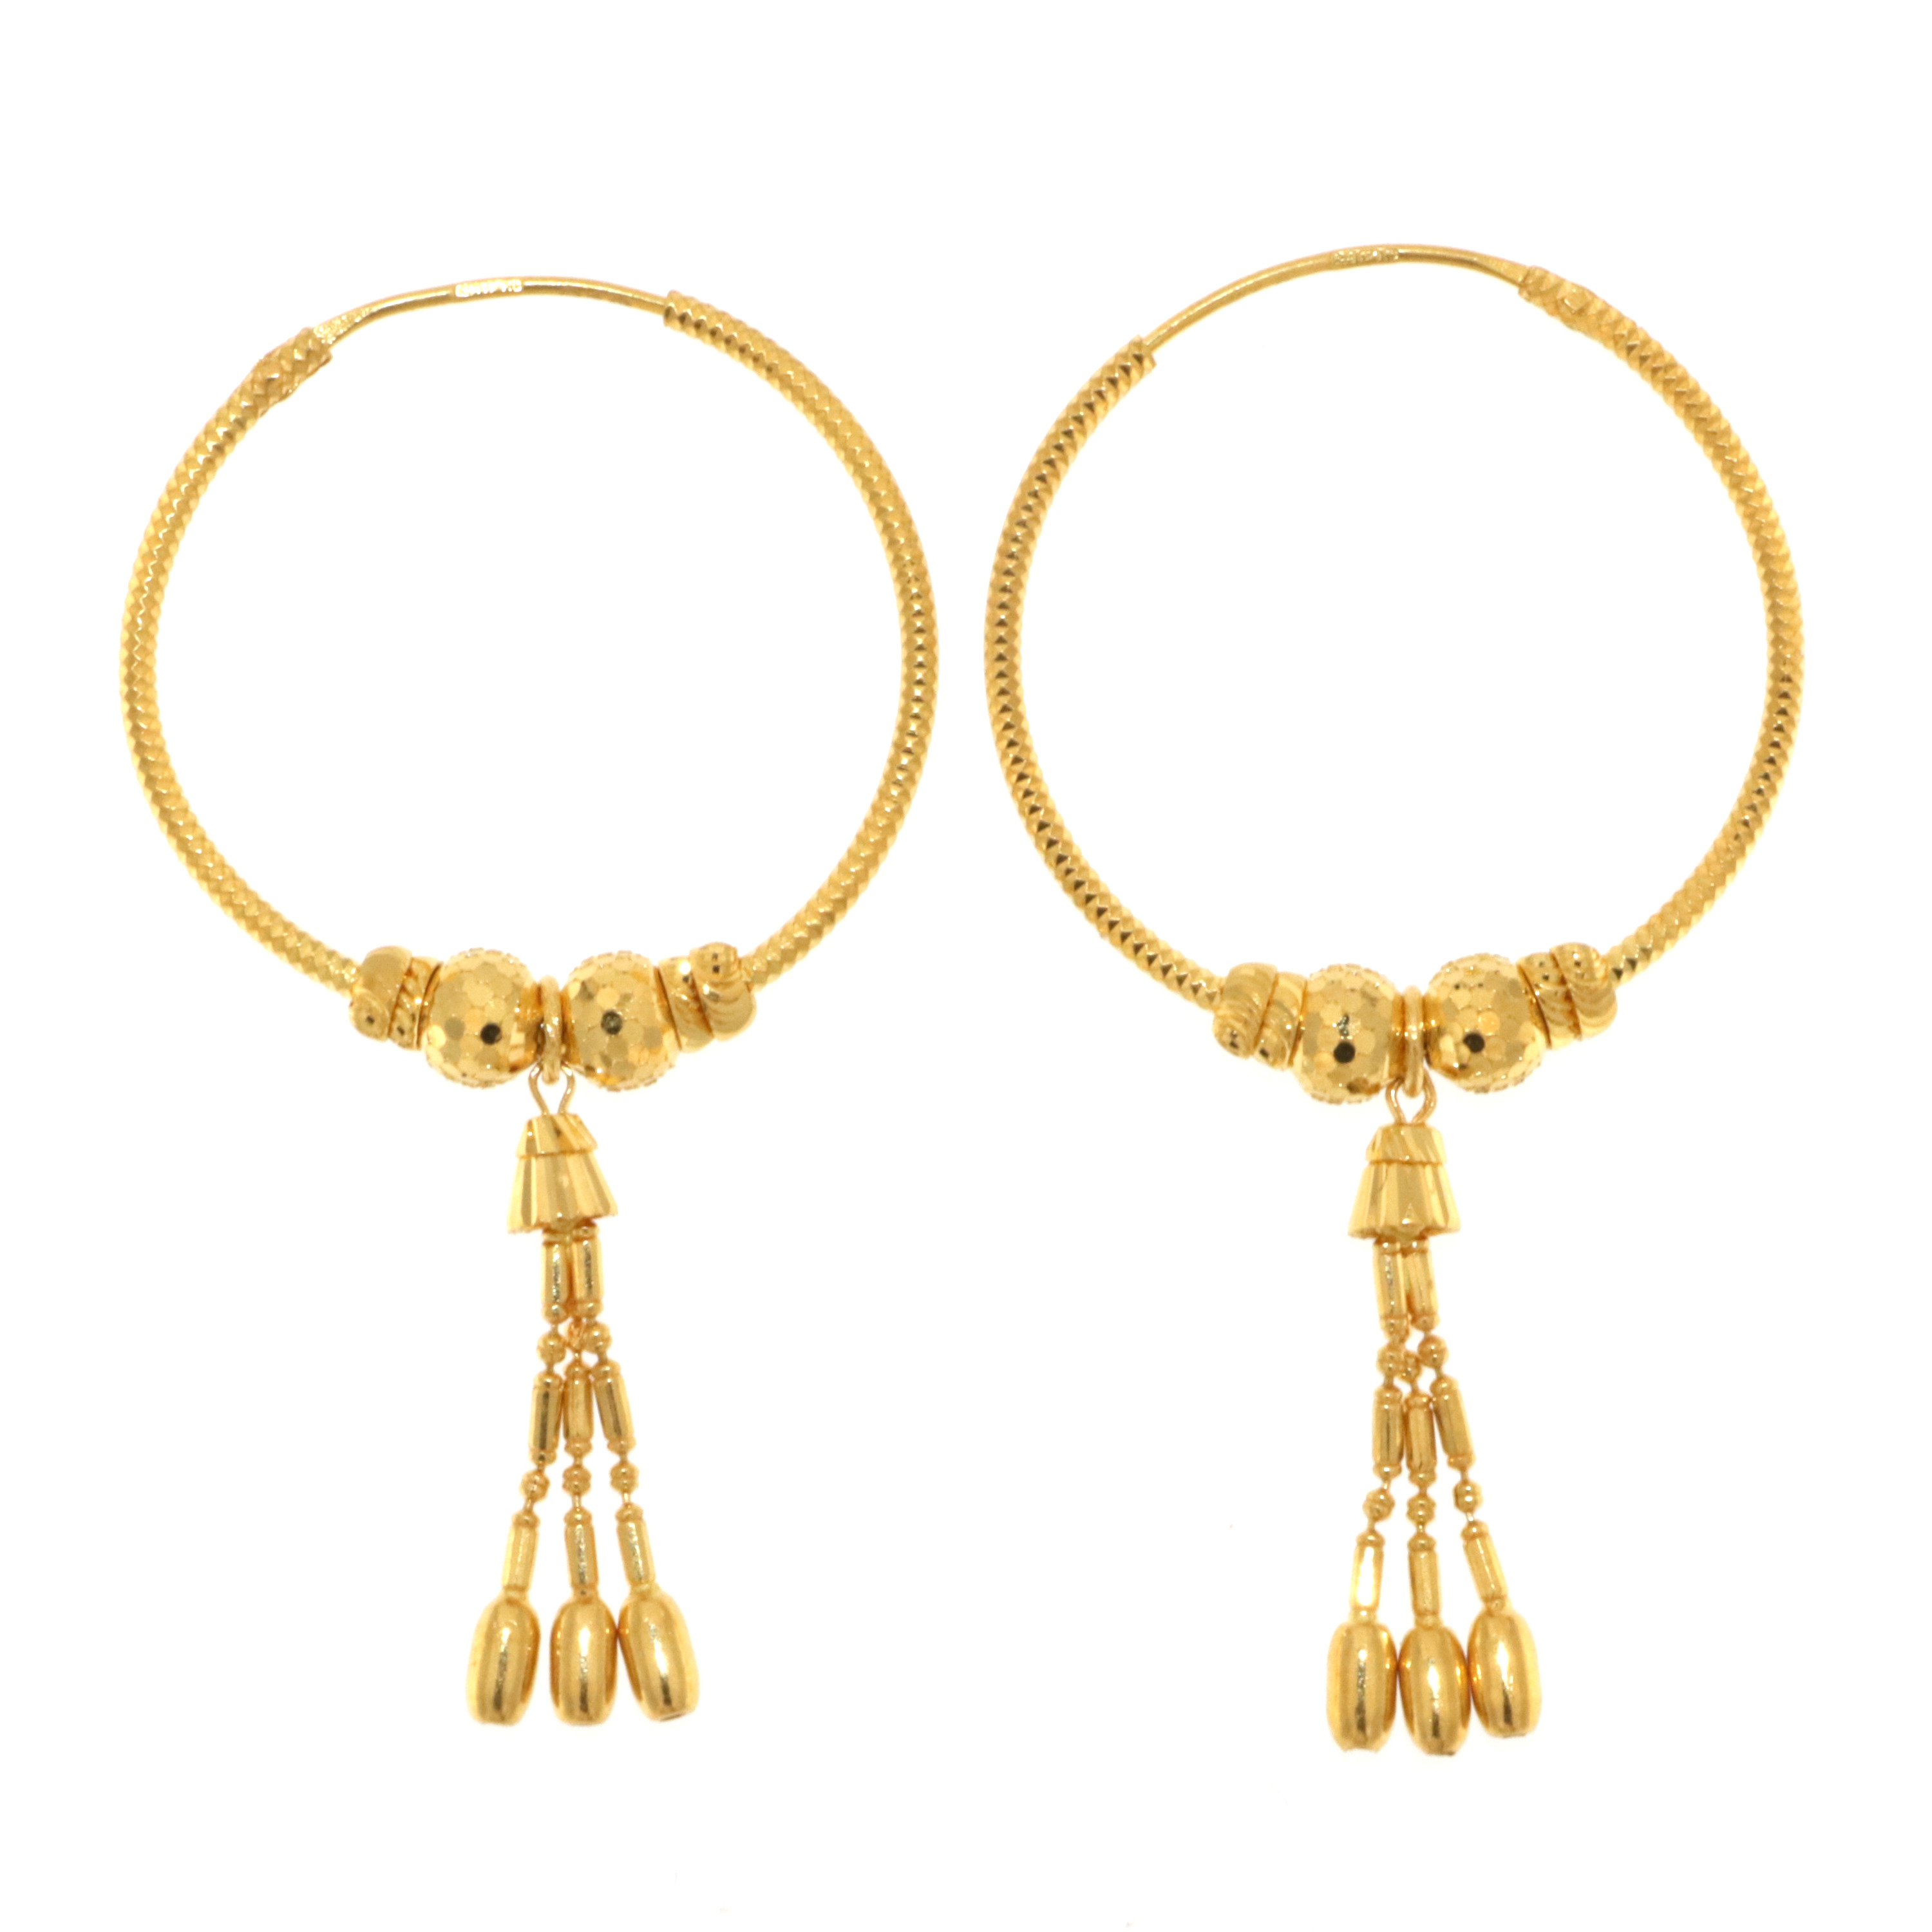 22ct Real Gold Asian/Indian/Pakistani Style Hoop Earrings